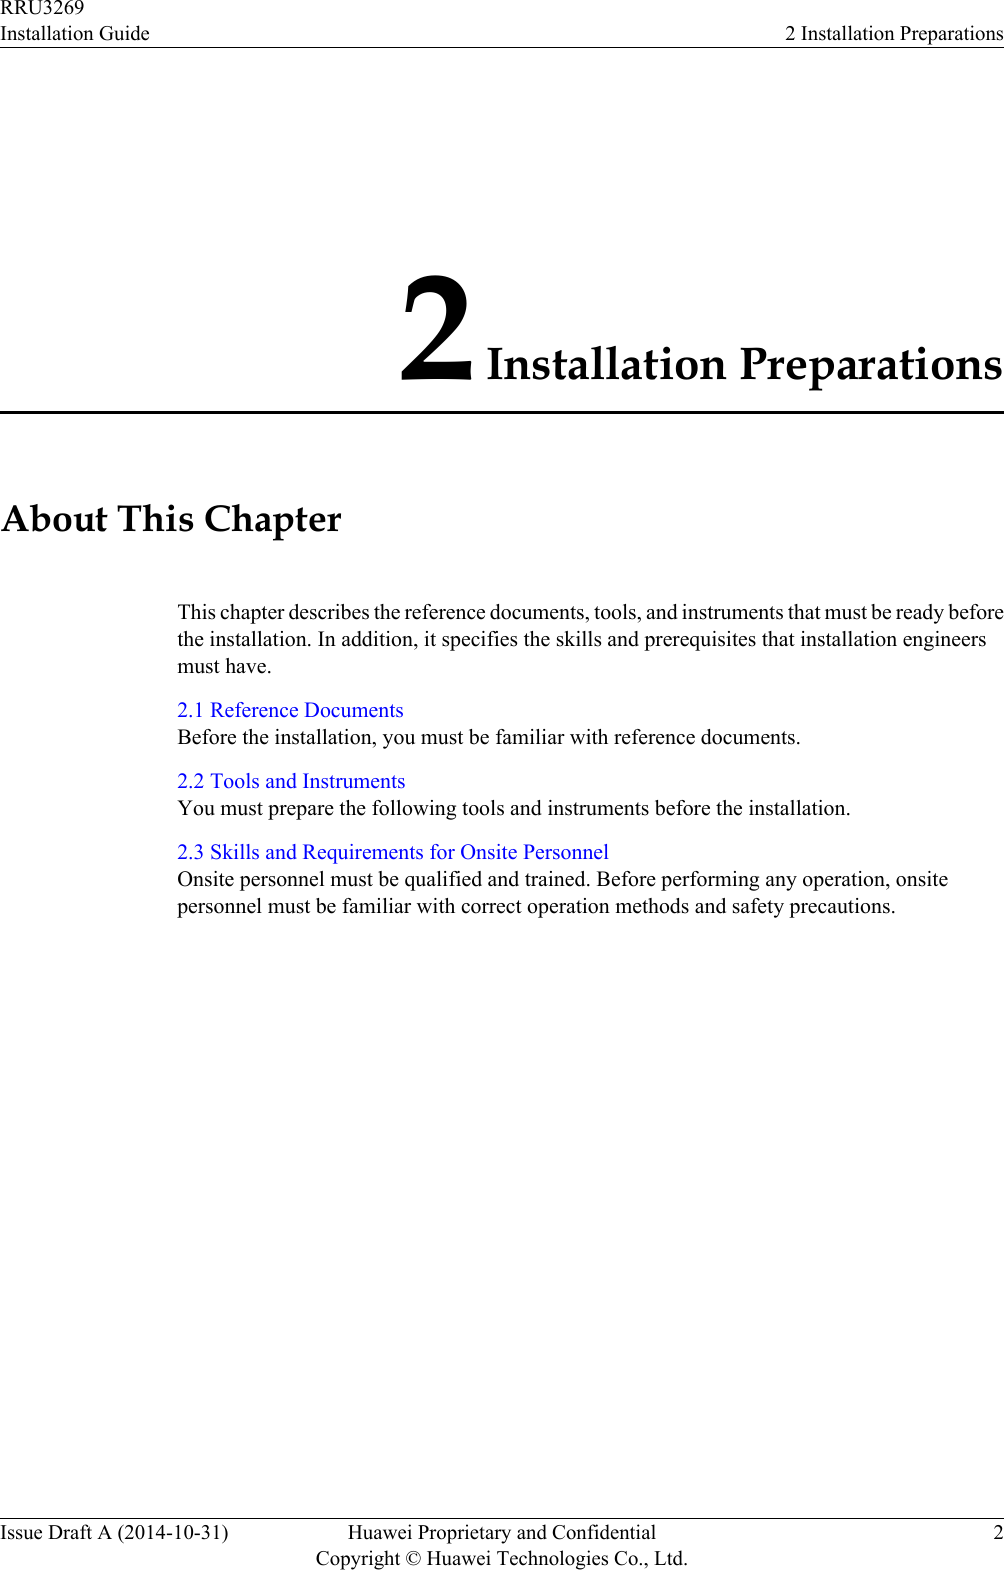 2 Installation PreparationsAbout This ChapterThis chapter describes the reference documents, tools, and instruments that must be ready beforethe installation. In addition, it specifies the skills and prerequisites that installation engineersmust have.2.1 Reference DocumentsBefore the installation, you must be familiar with reference documents.2.2 Tools and InstrumentsYou must prepare the following tools and instruments before the installation.2.3 Skills and Requirements for Onsite PersonnelOnsite personnel must be qualified and trained. Before performing any operation, onsitepersonnel must be familiar with correct operation methods and safety precautions.RRU3269Installation Guide 2 Installation PreparationsIssue Draft A (2014-10-31) Huawei Proprietary and ConfidentialCopyright © Huawei Technologies Co., Ltd.2